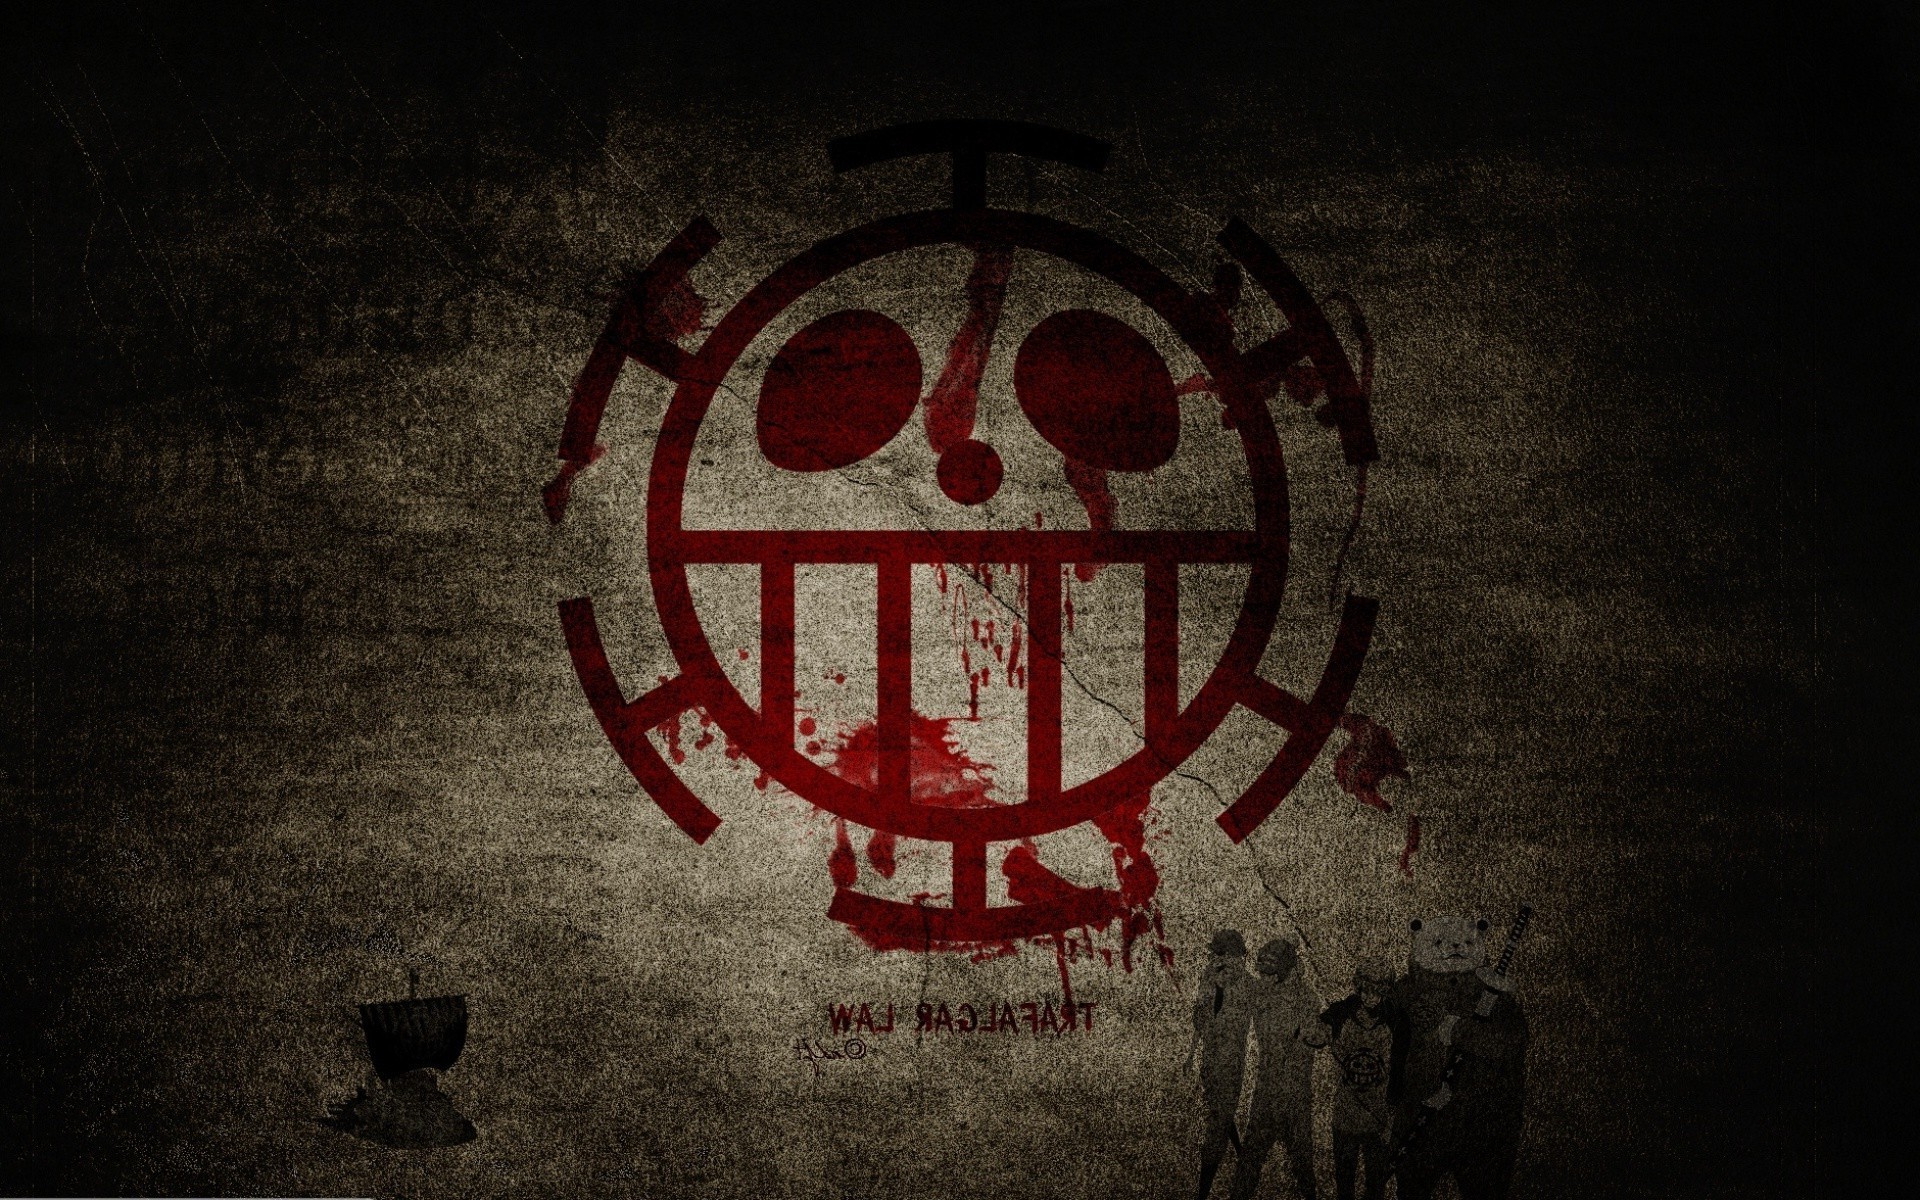 Wallpaper, illustration, red, text, logo, circle, One Piece, Trafalgar Law, heart pirates, shape, darkness, number, 1920x1200 px, font, album cover 1920x1200